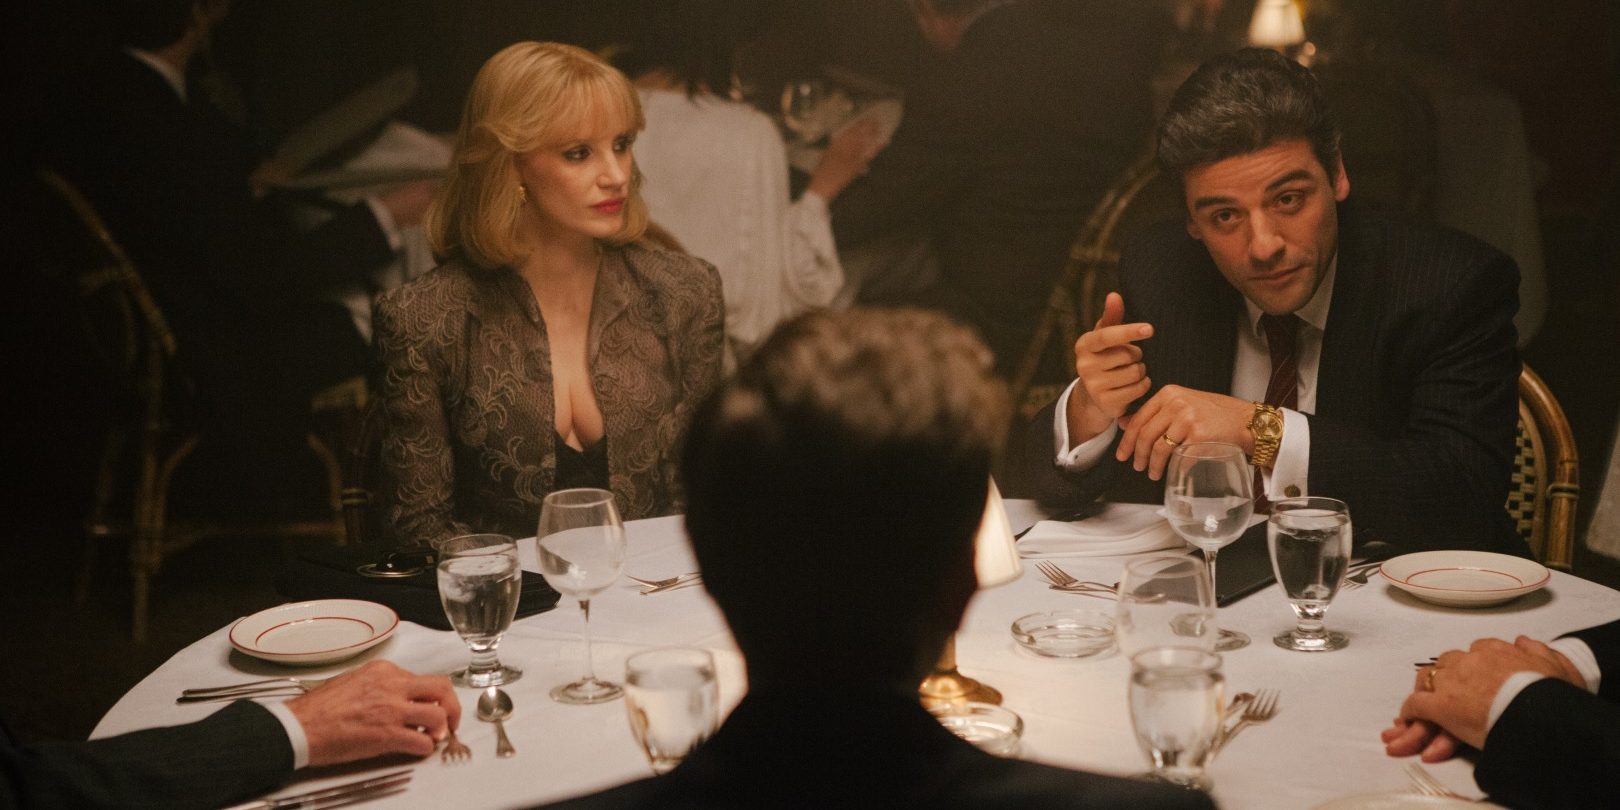 A Most Violent Year Movie Review — Smart and gripping, one of the best films of the year